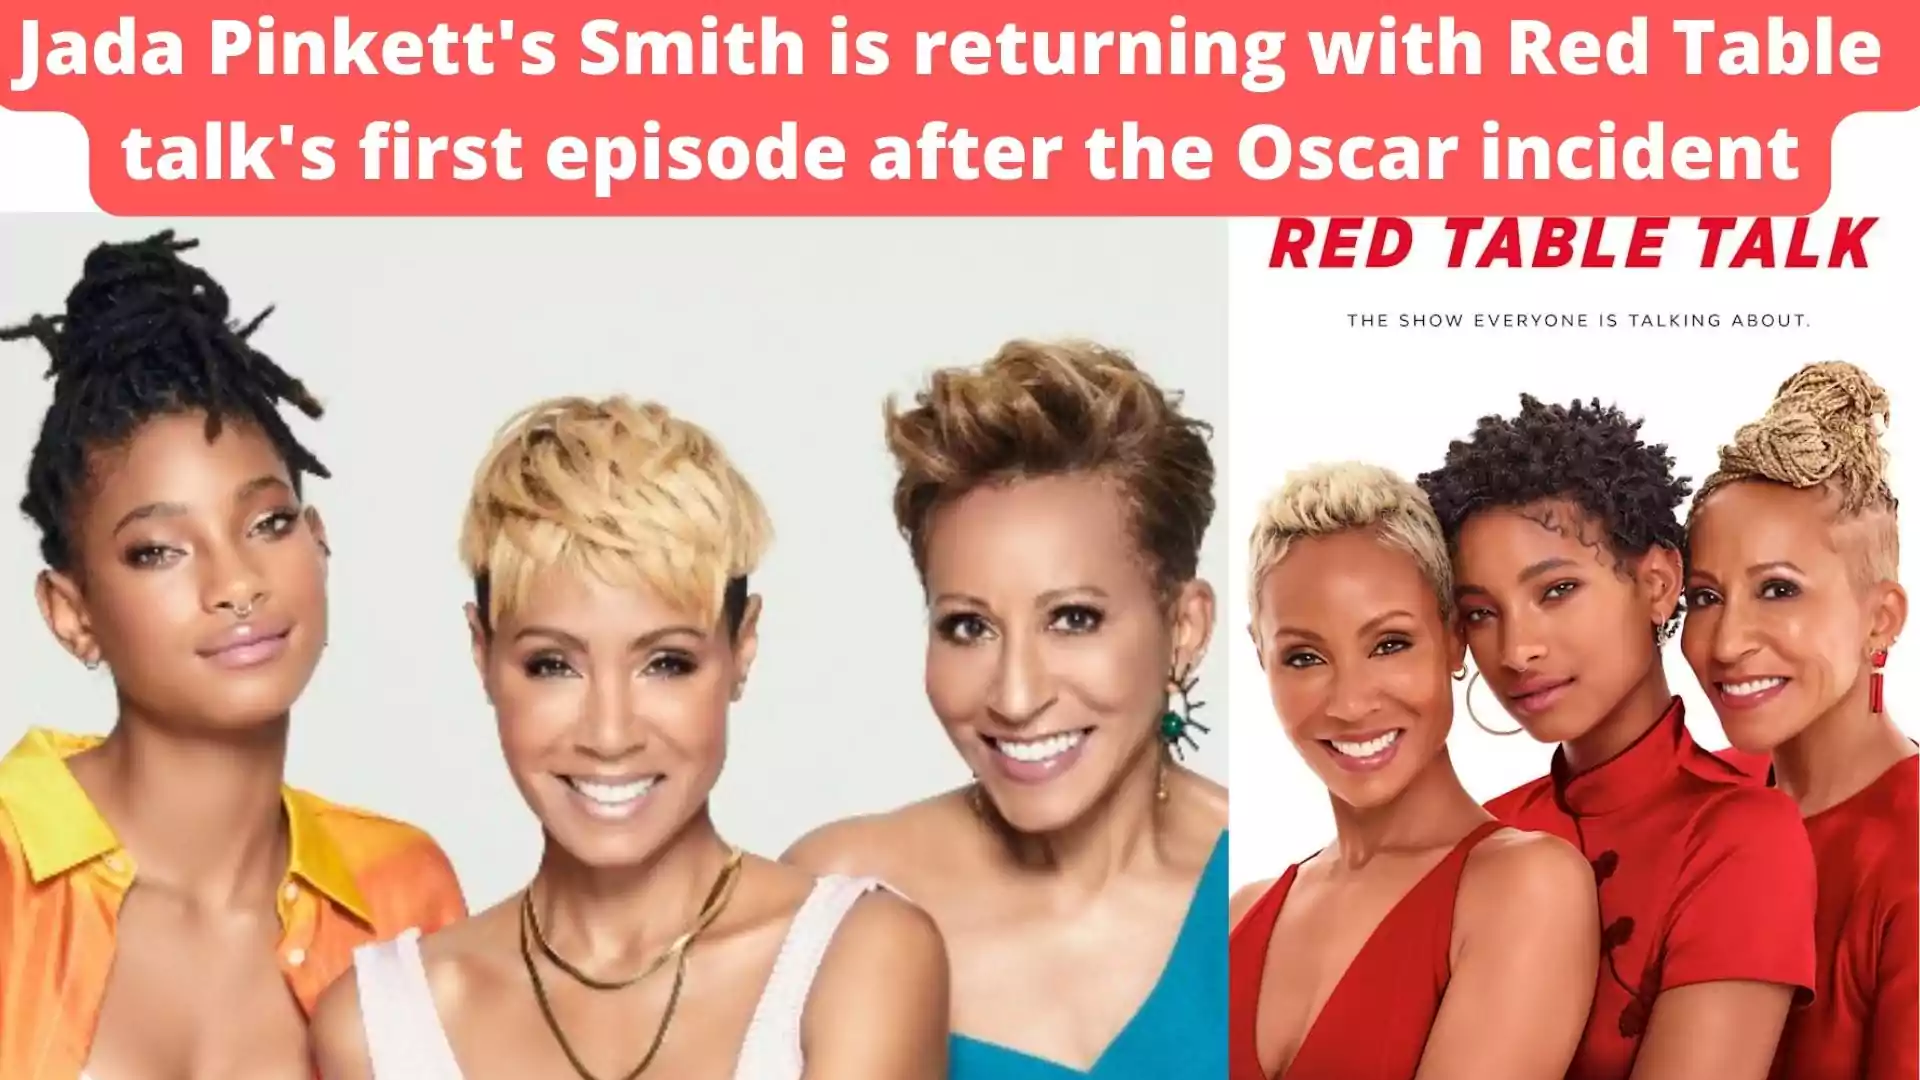 Jada Pinkett's Smith is returning with Red Table talk's first episode after the Oscar incident wallpaper and images